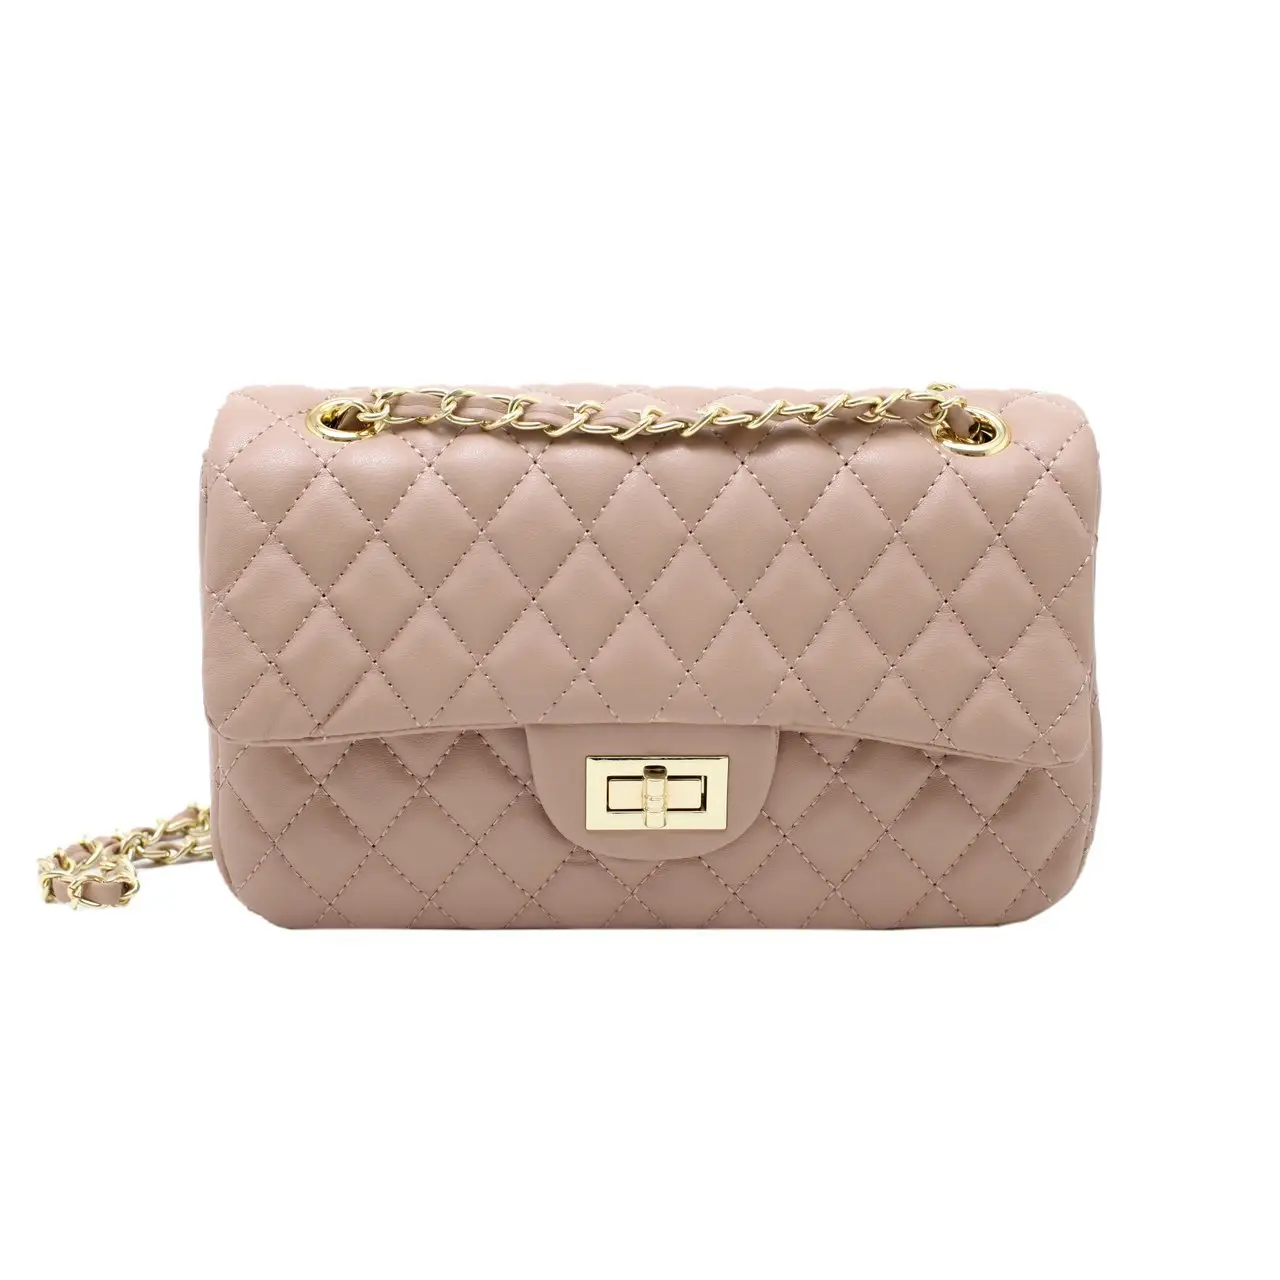 Quilted Crossbody Bags for Women PVC Leather Ladies Shoulder Purses with Chain Strap Stylish Clutch Purse